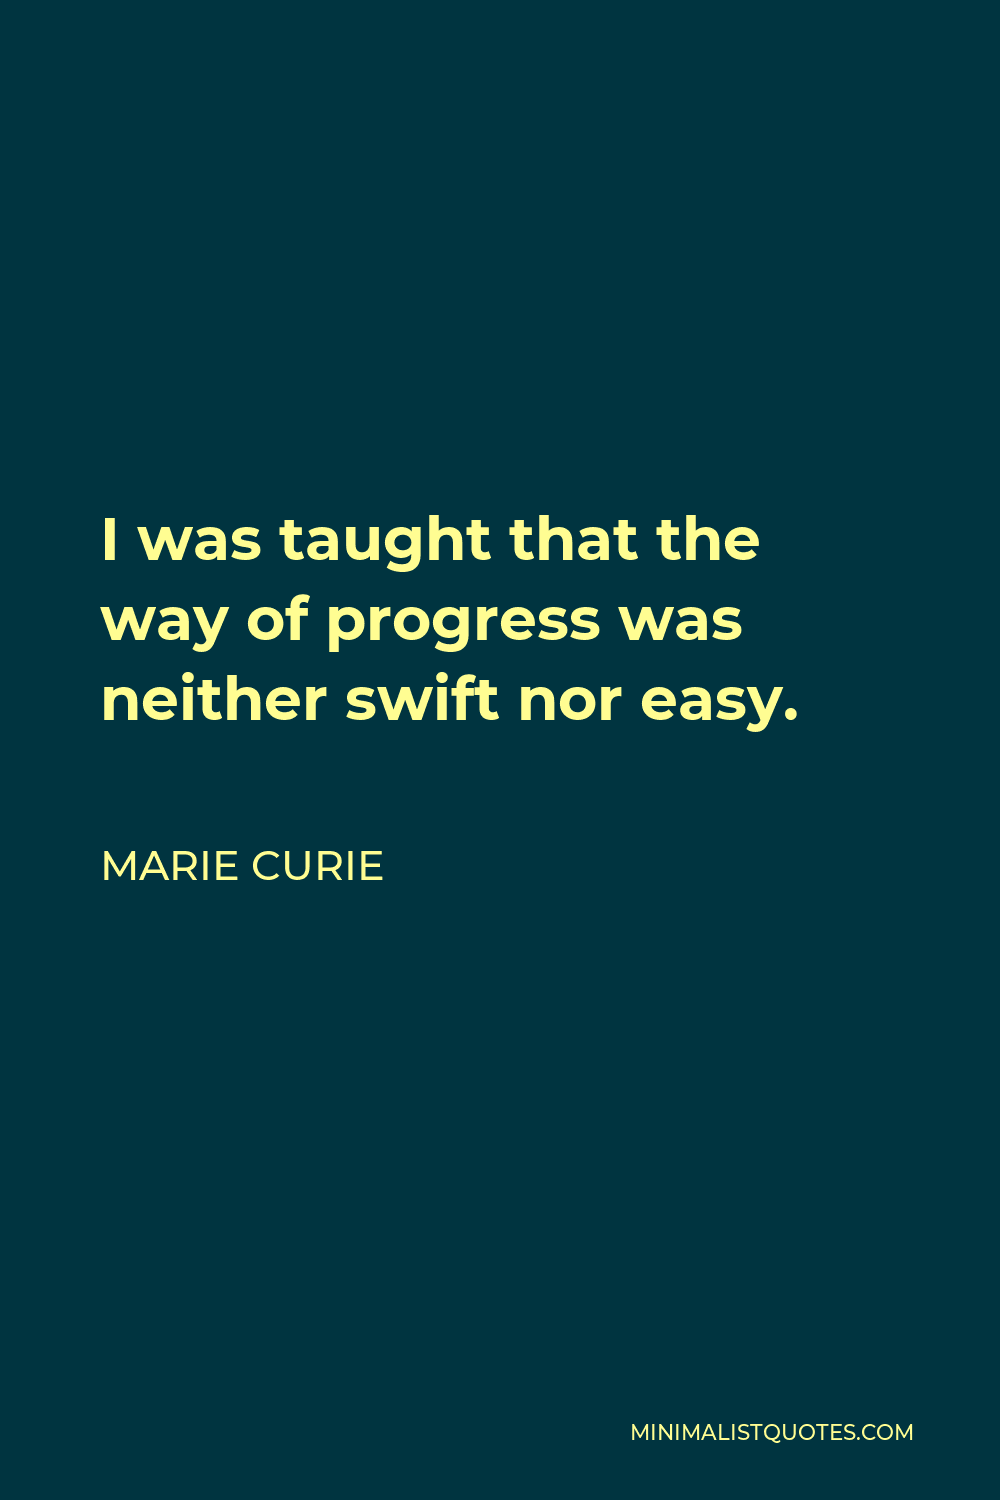 Marie Curie Quote - I was taught that the way of progress was neither swift nor easy.